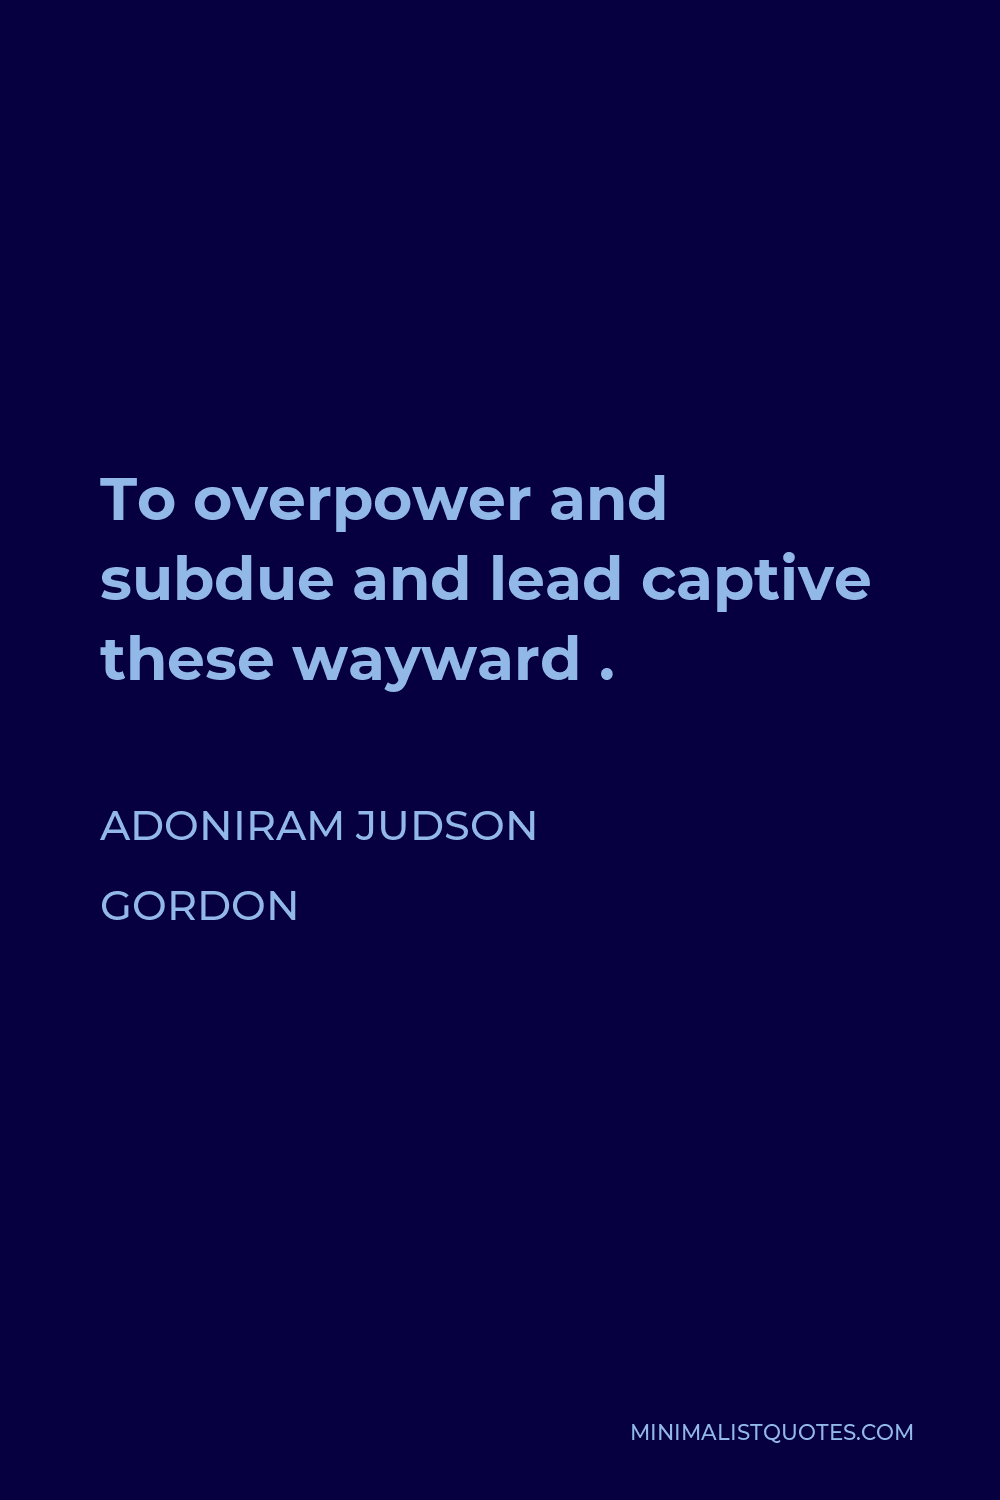 Adoniram Judson Gordon Quote - To overpower and subdue and lead captive these wayward .